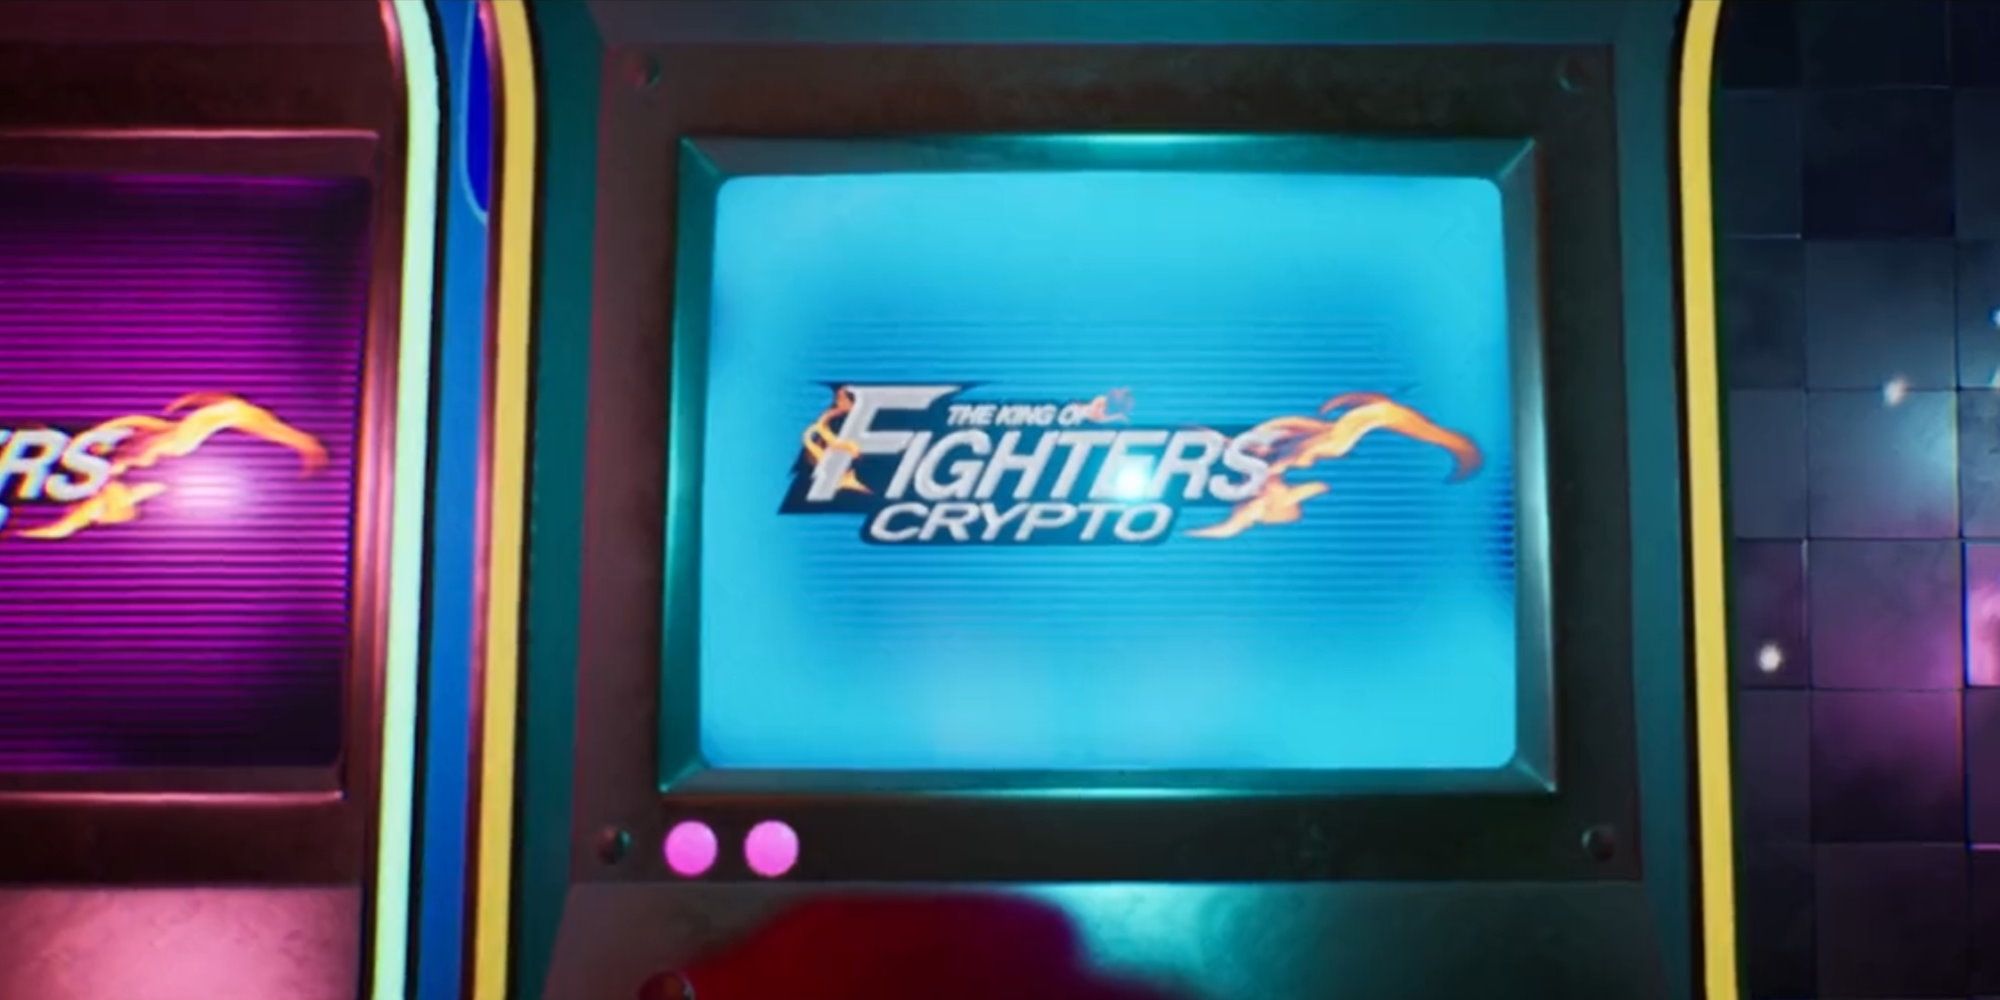 King of Fighters Crypto